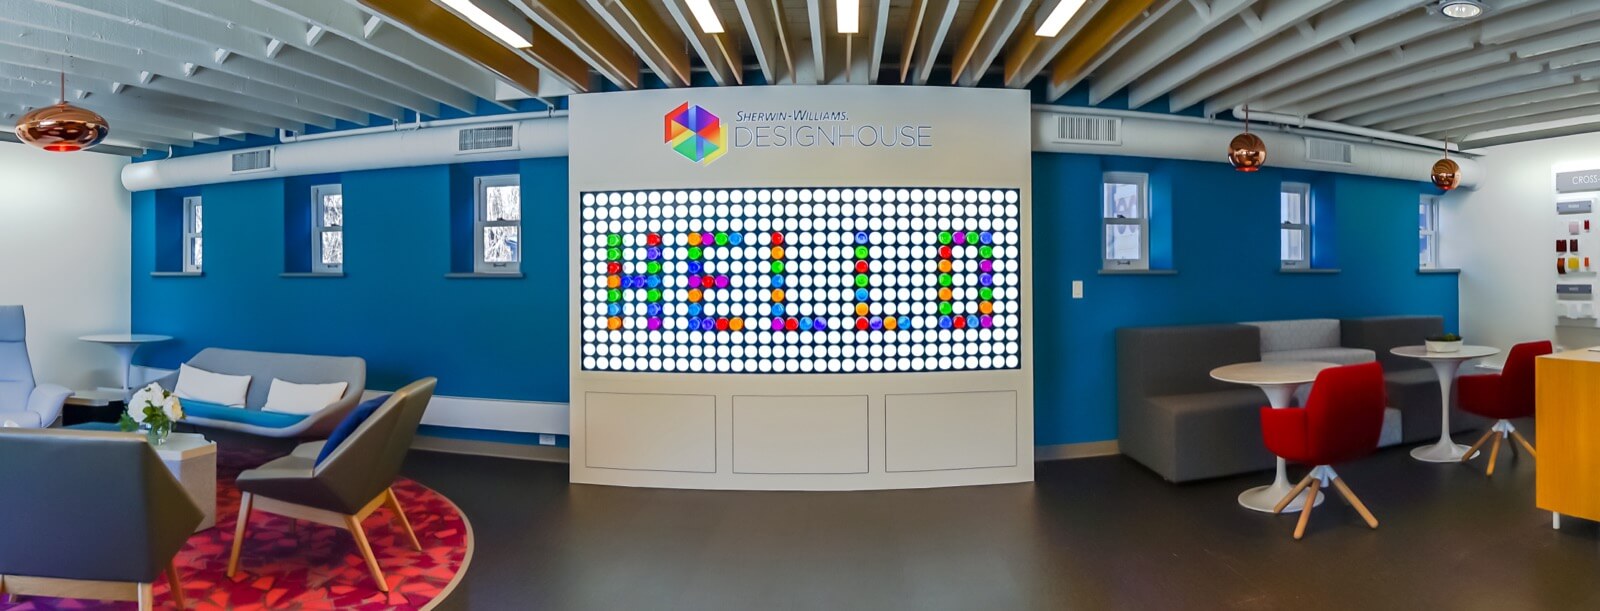 "Hello" spelled using colorful lights for a paint company's marketing booth